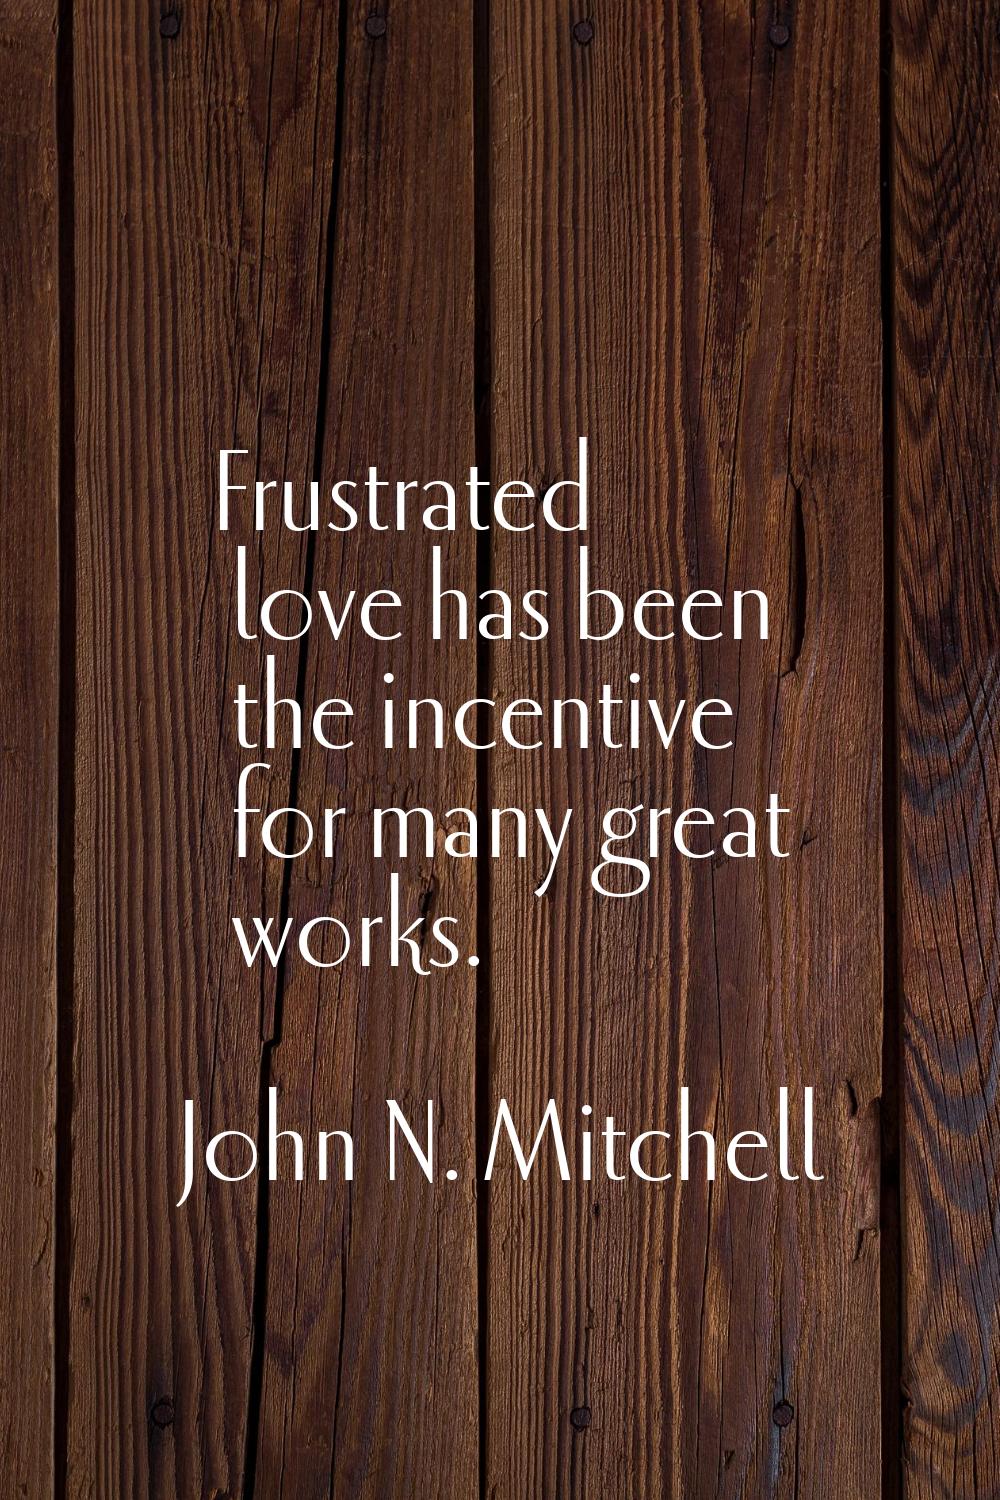 Frustrated love has been the incentive for many great works.